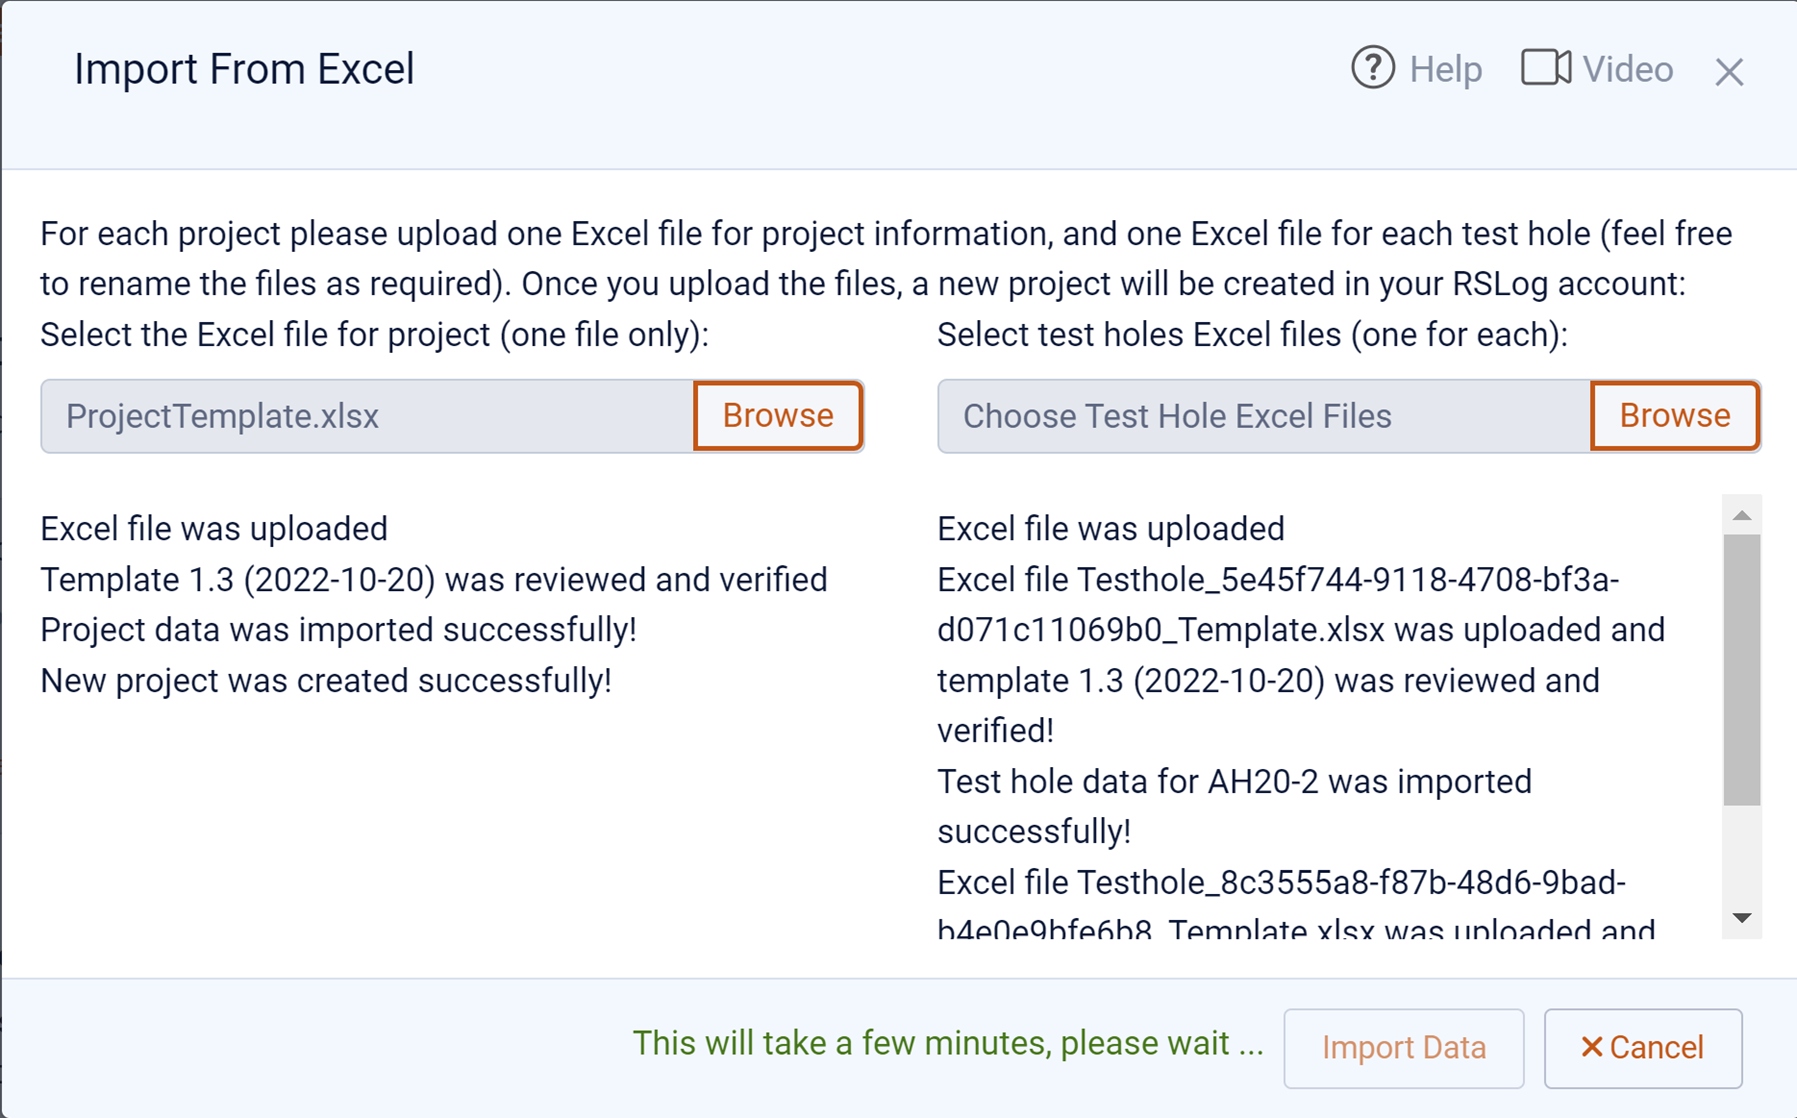 Import from excel dialog